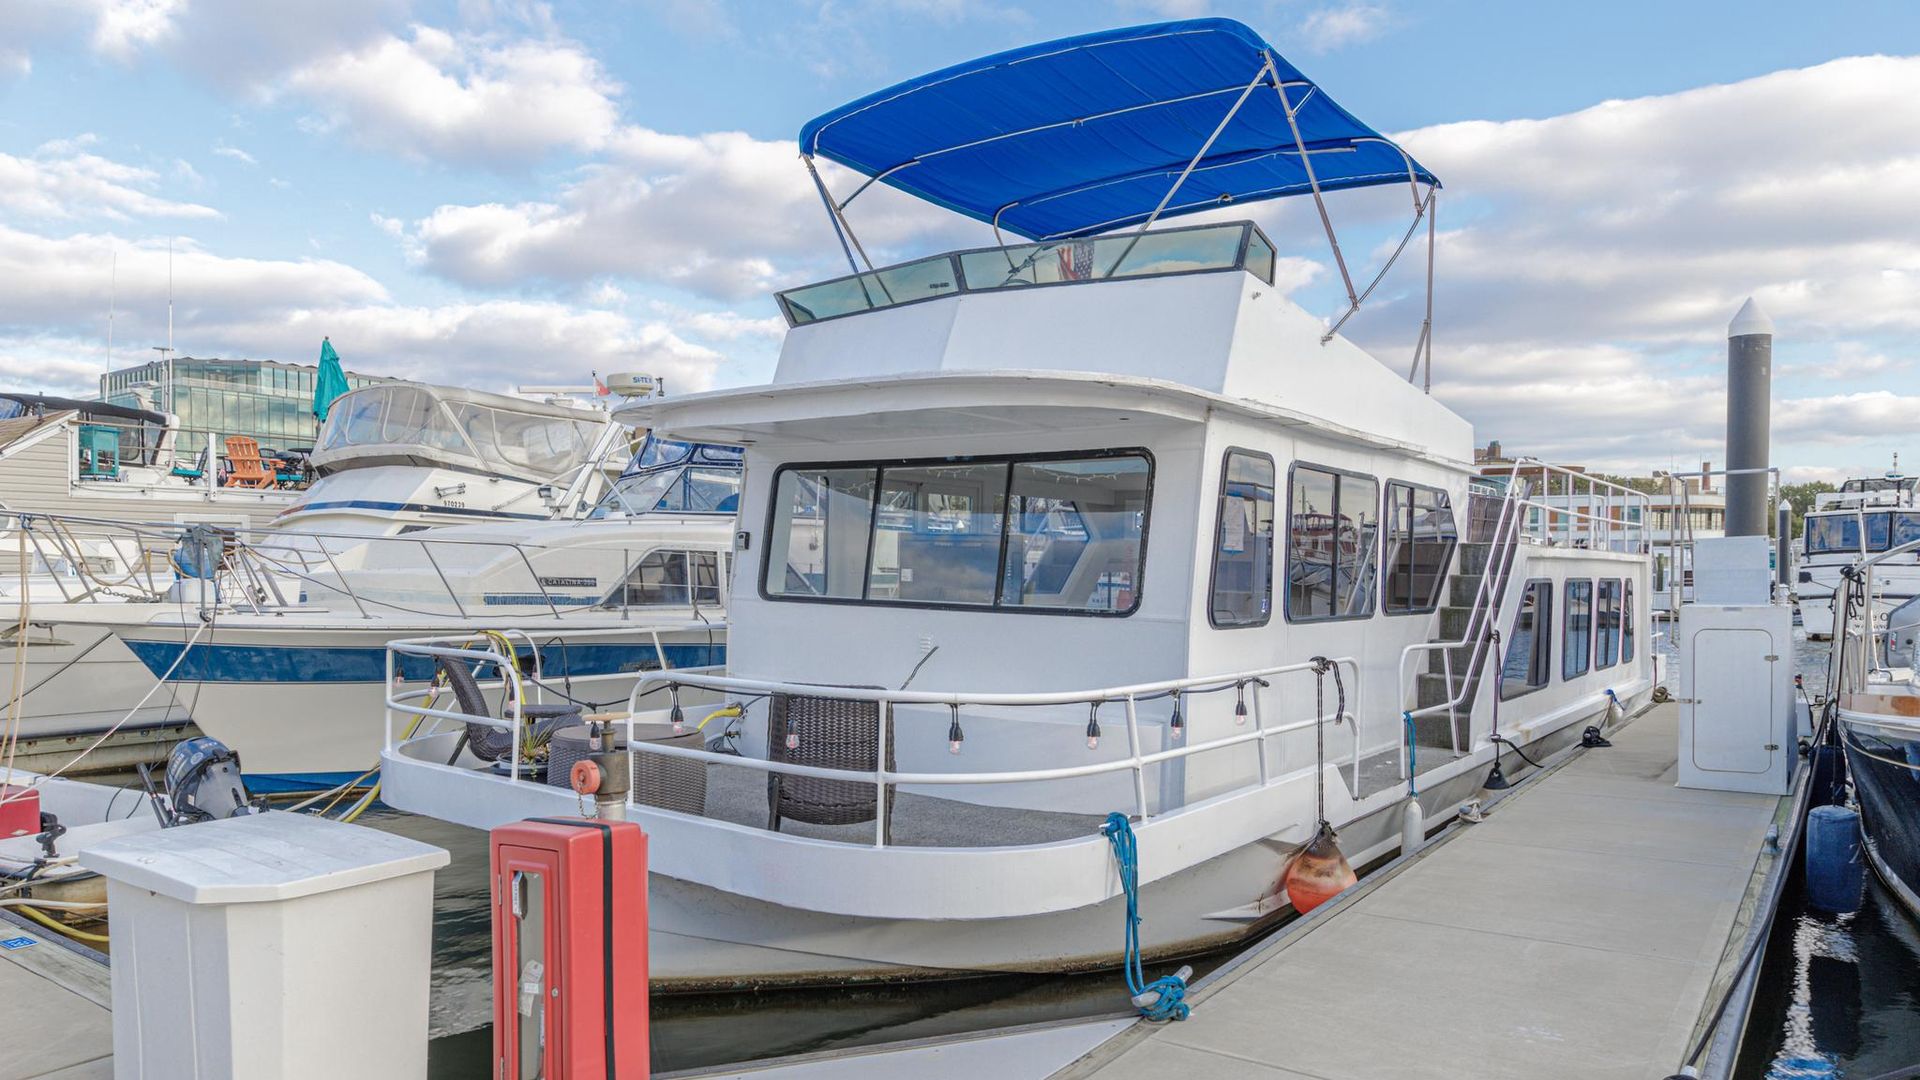 The houseboat for sale at the Wharf.